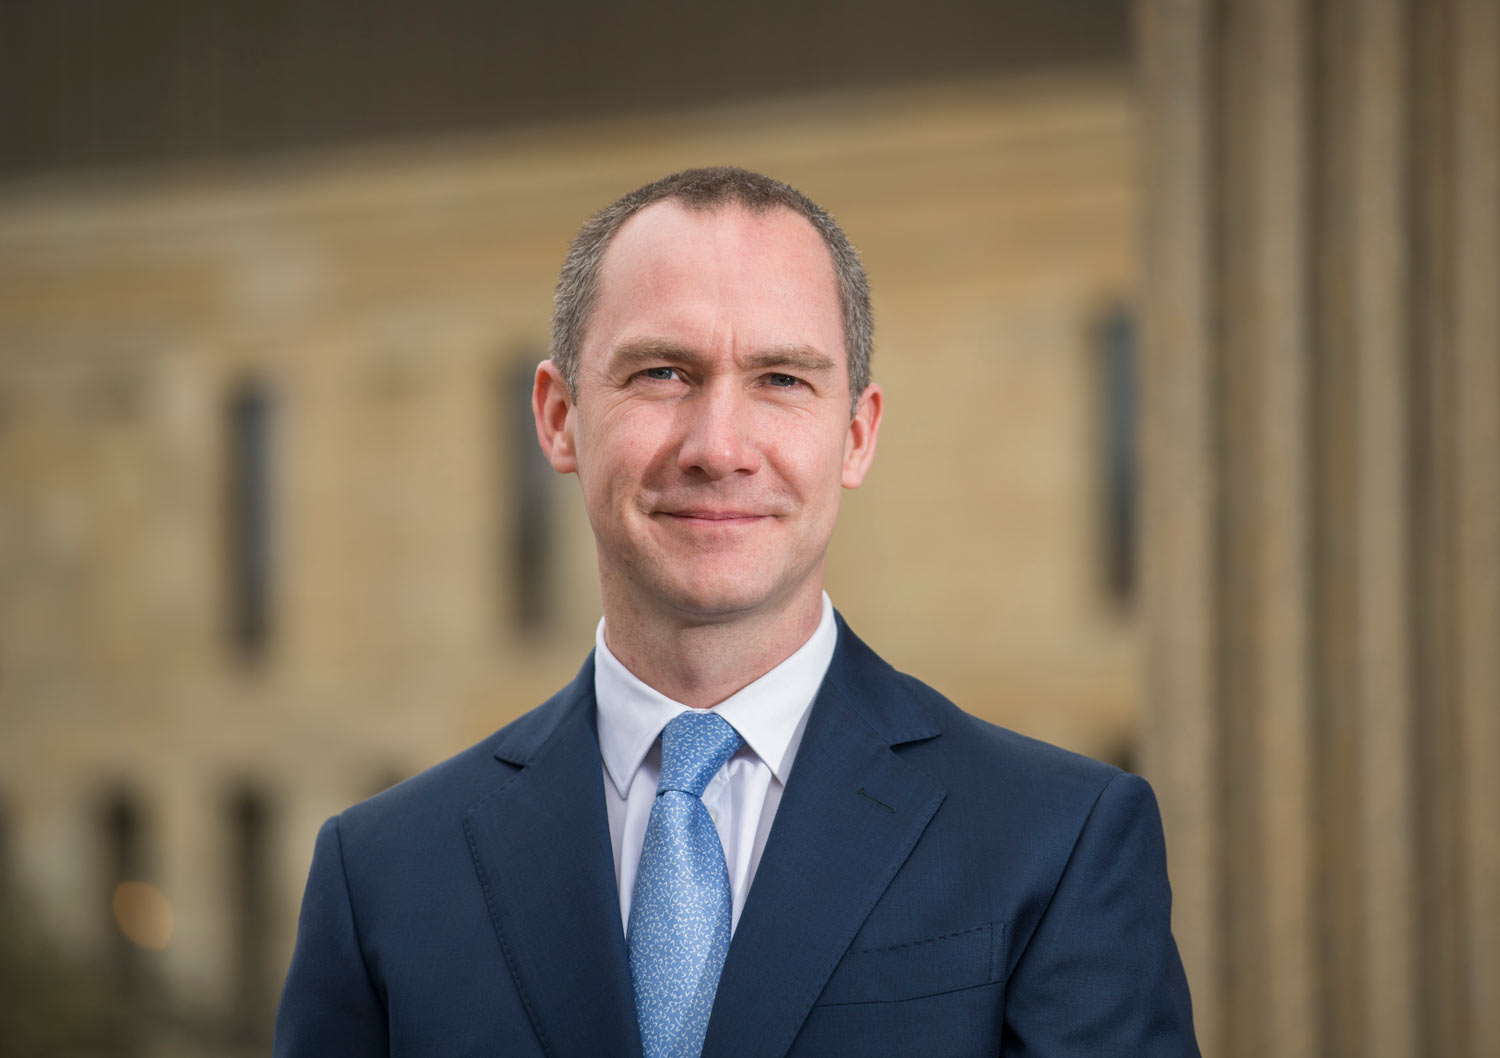 Justin Garnett has been appointed as the managing director of leading Yorkshire property developer and investor, The Ogden Group of Companies.